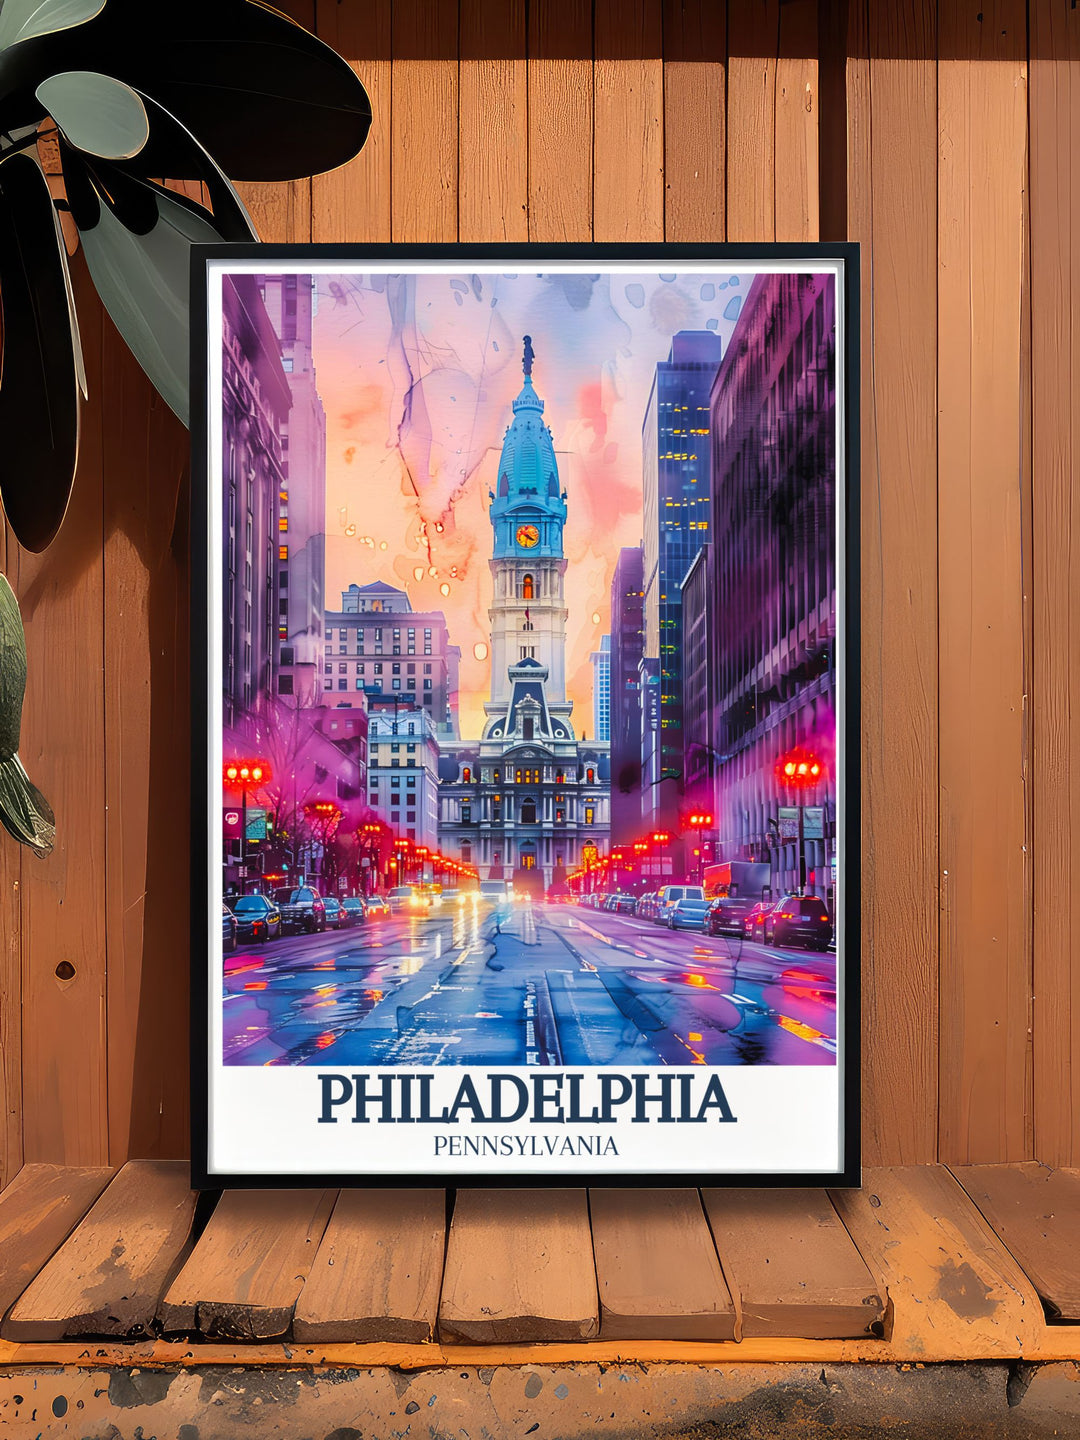 Beautiful Philadelphia artwork depicting Independence National Historical Park Franklin Institute and City Hall perfect for those who appreciate historical landmarks and wish to enhance their home decor